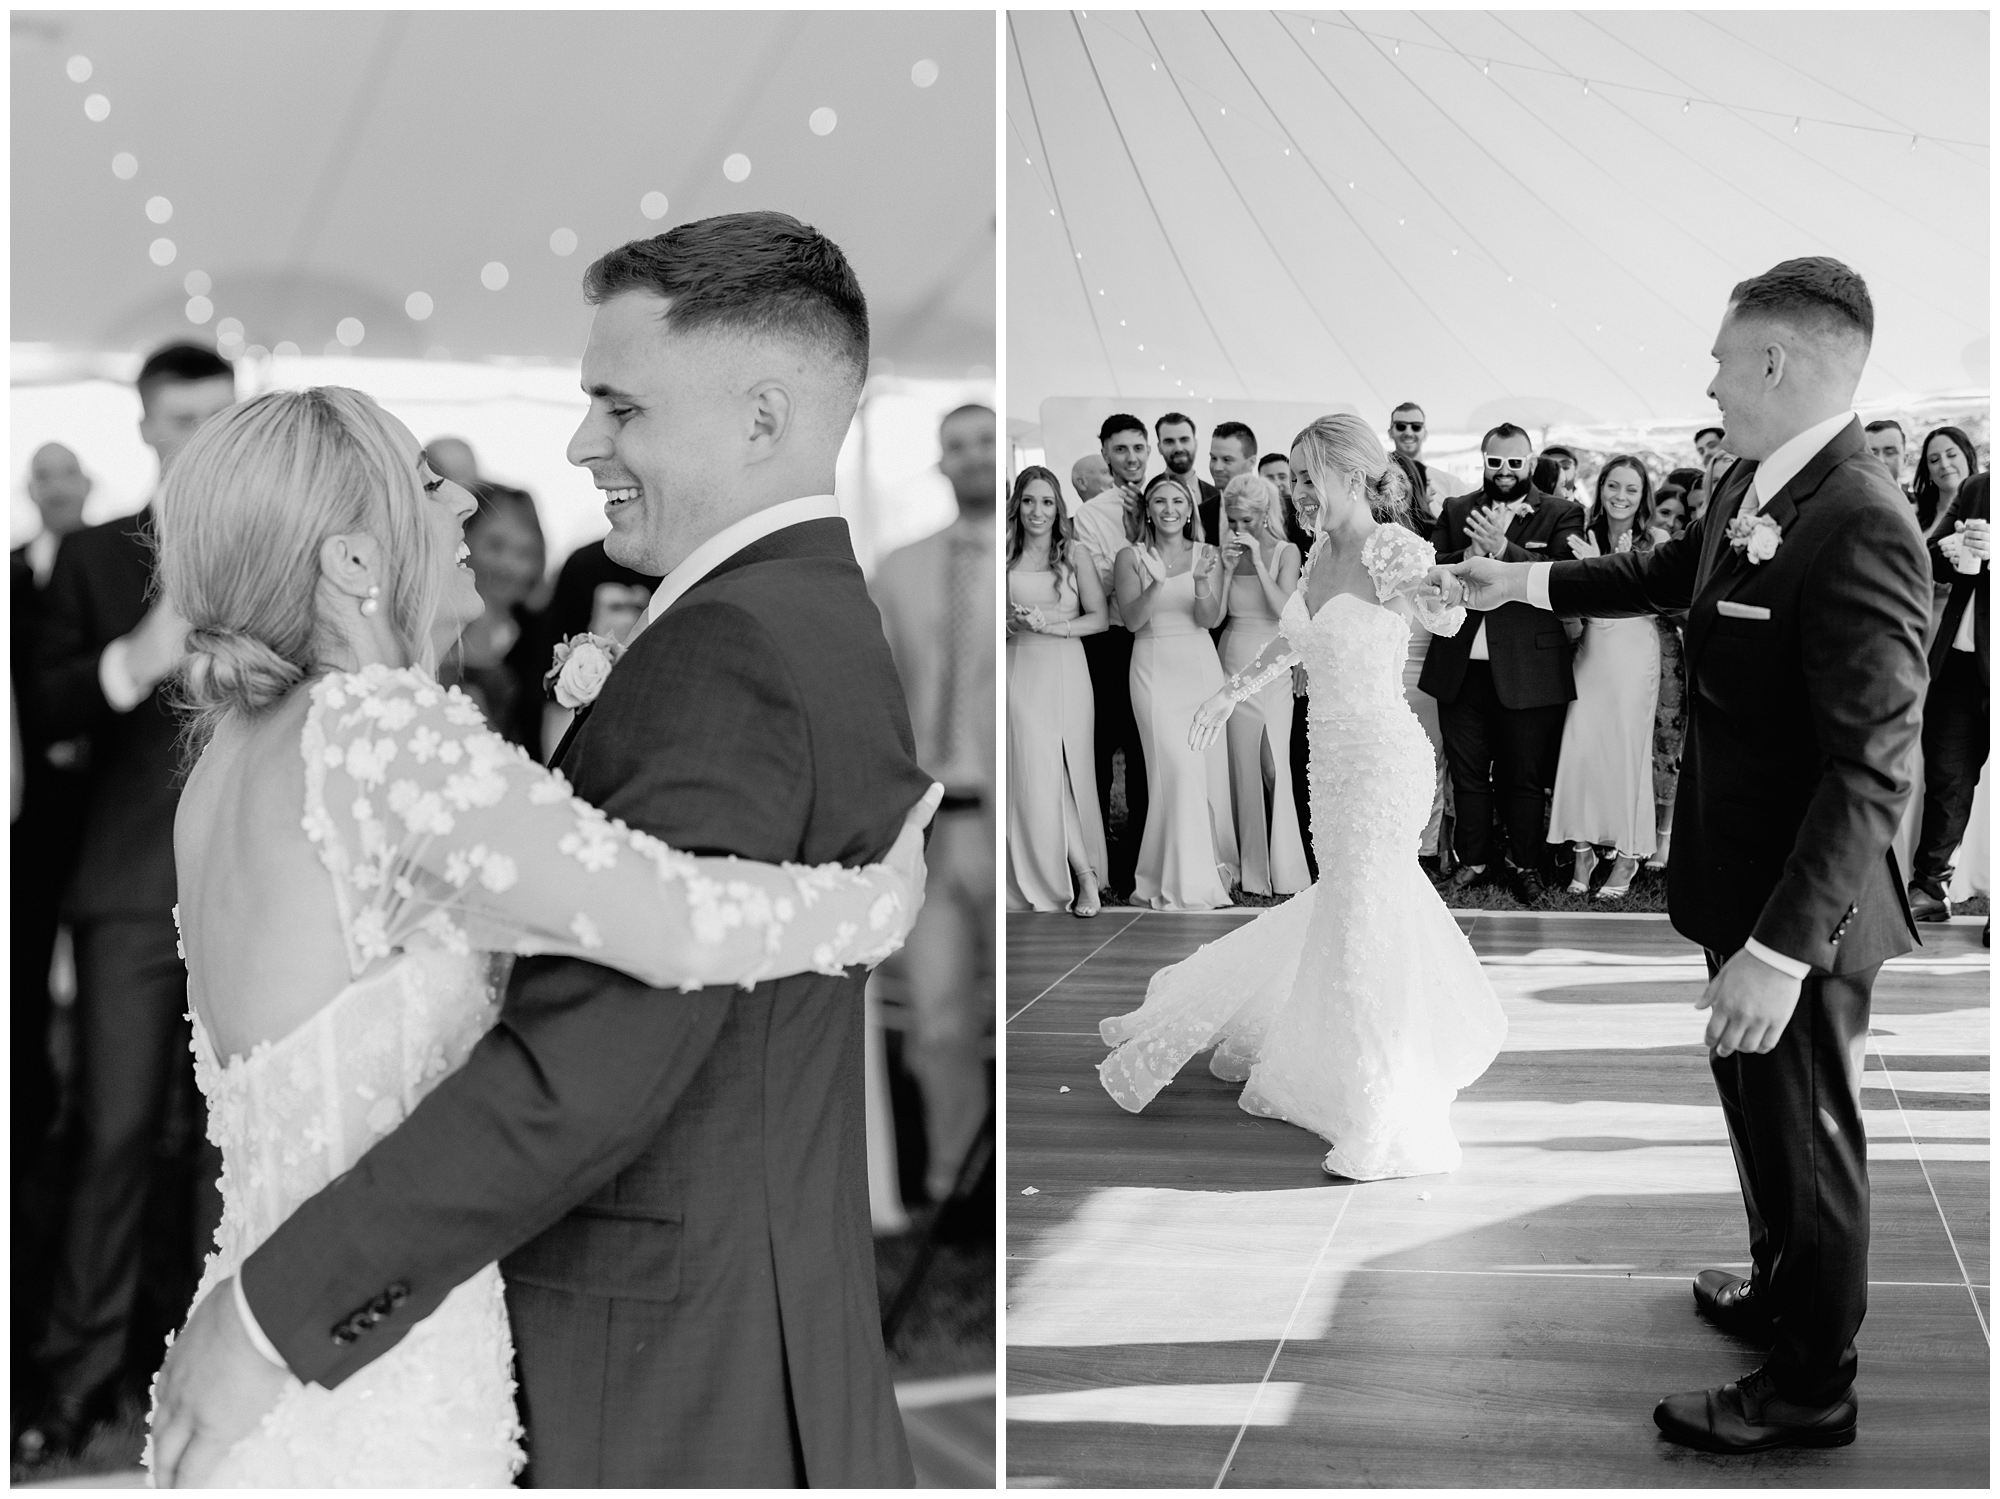 First dance photos under the tent at Viewpoint Hotel wedding reception in York Maine